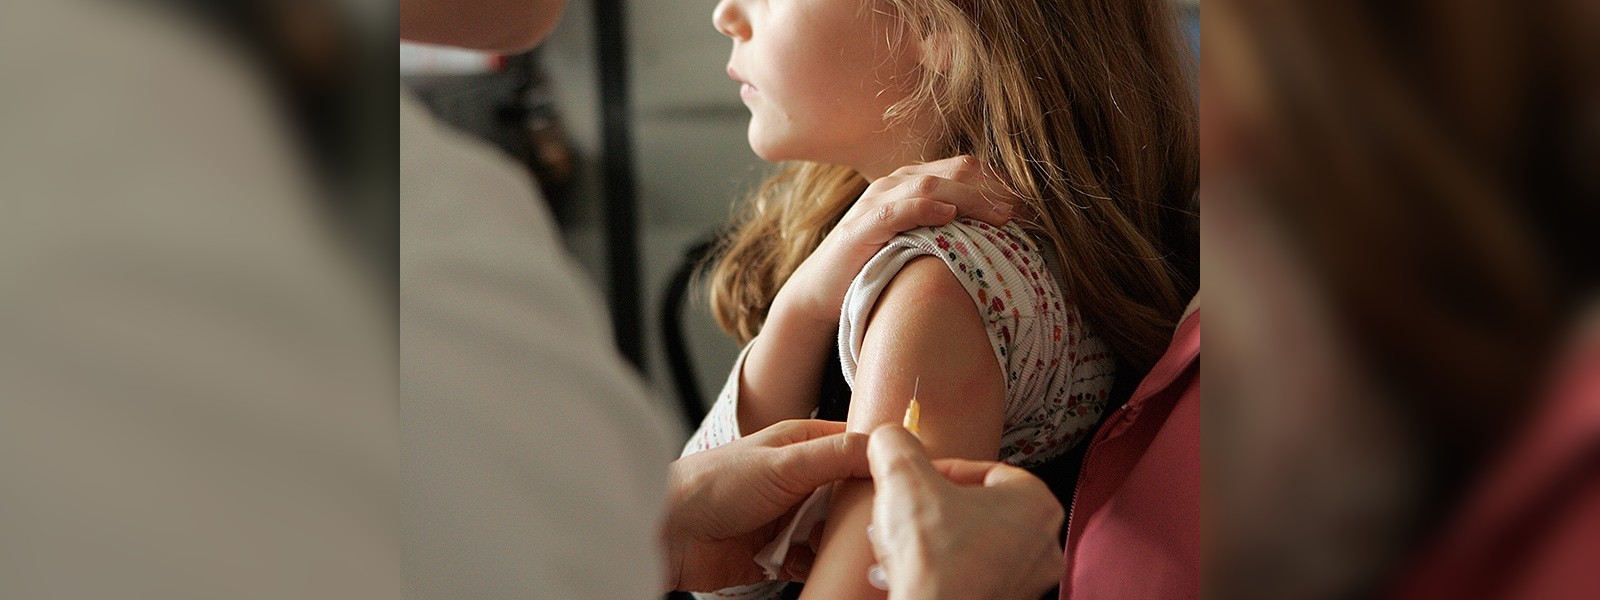 Report on vaccinating children, by Thursday